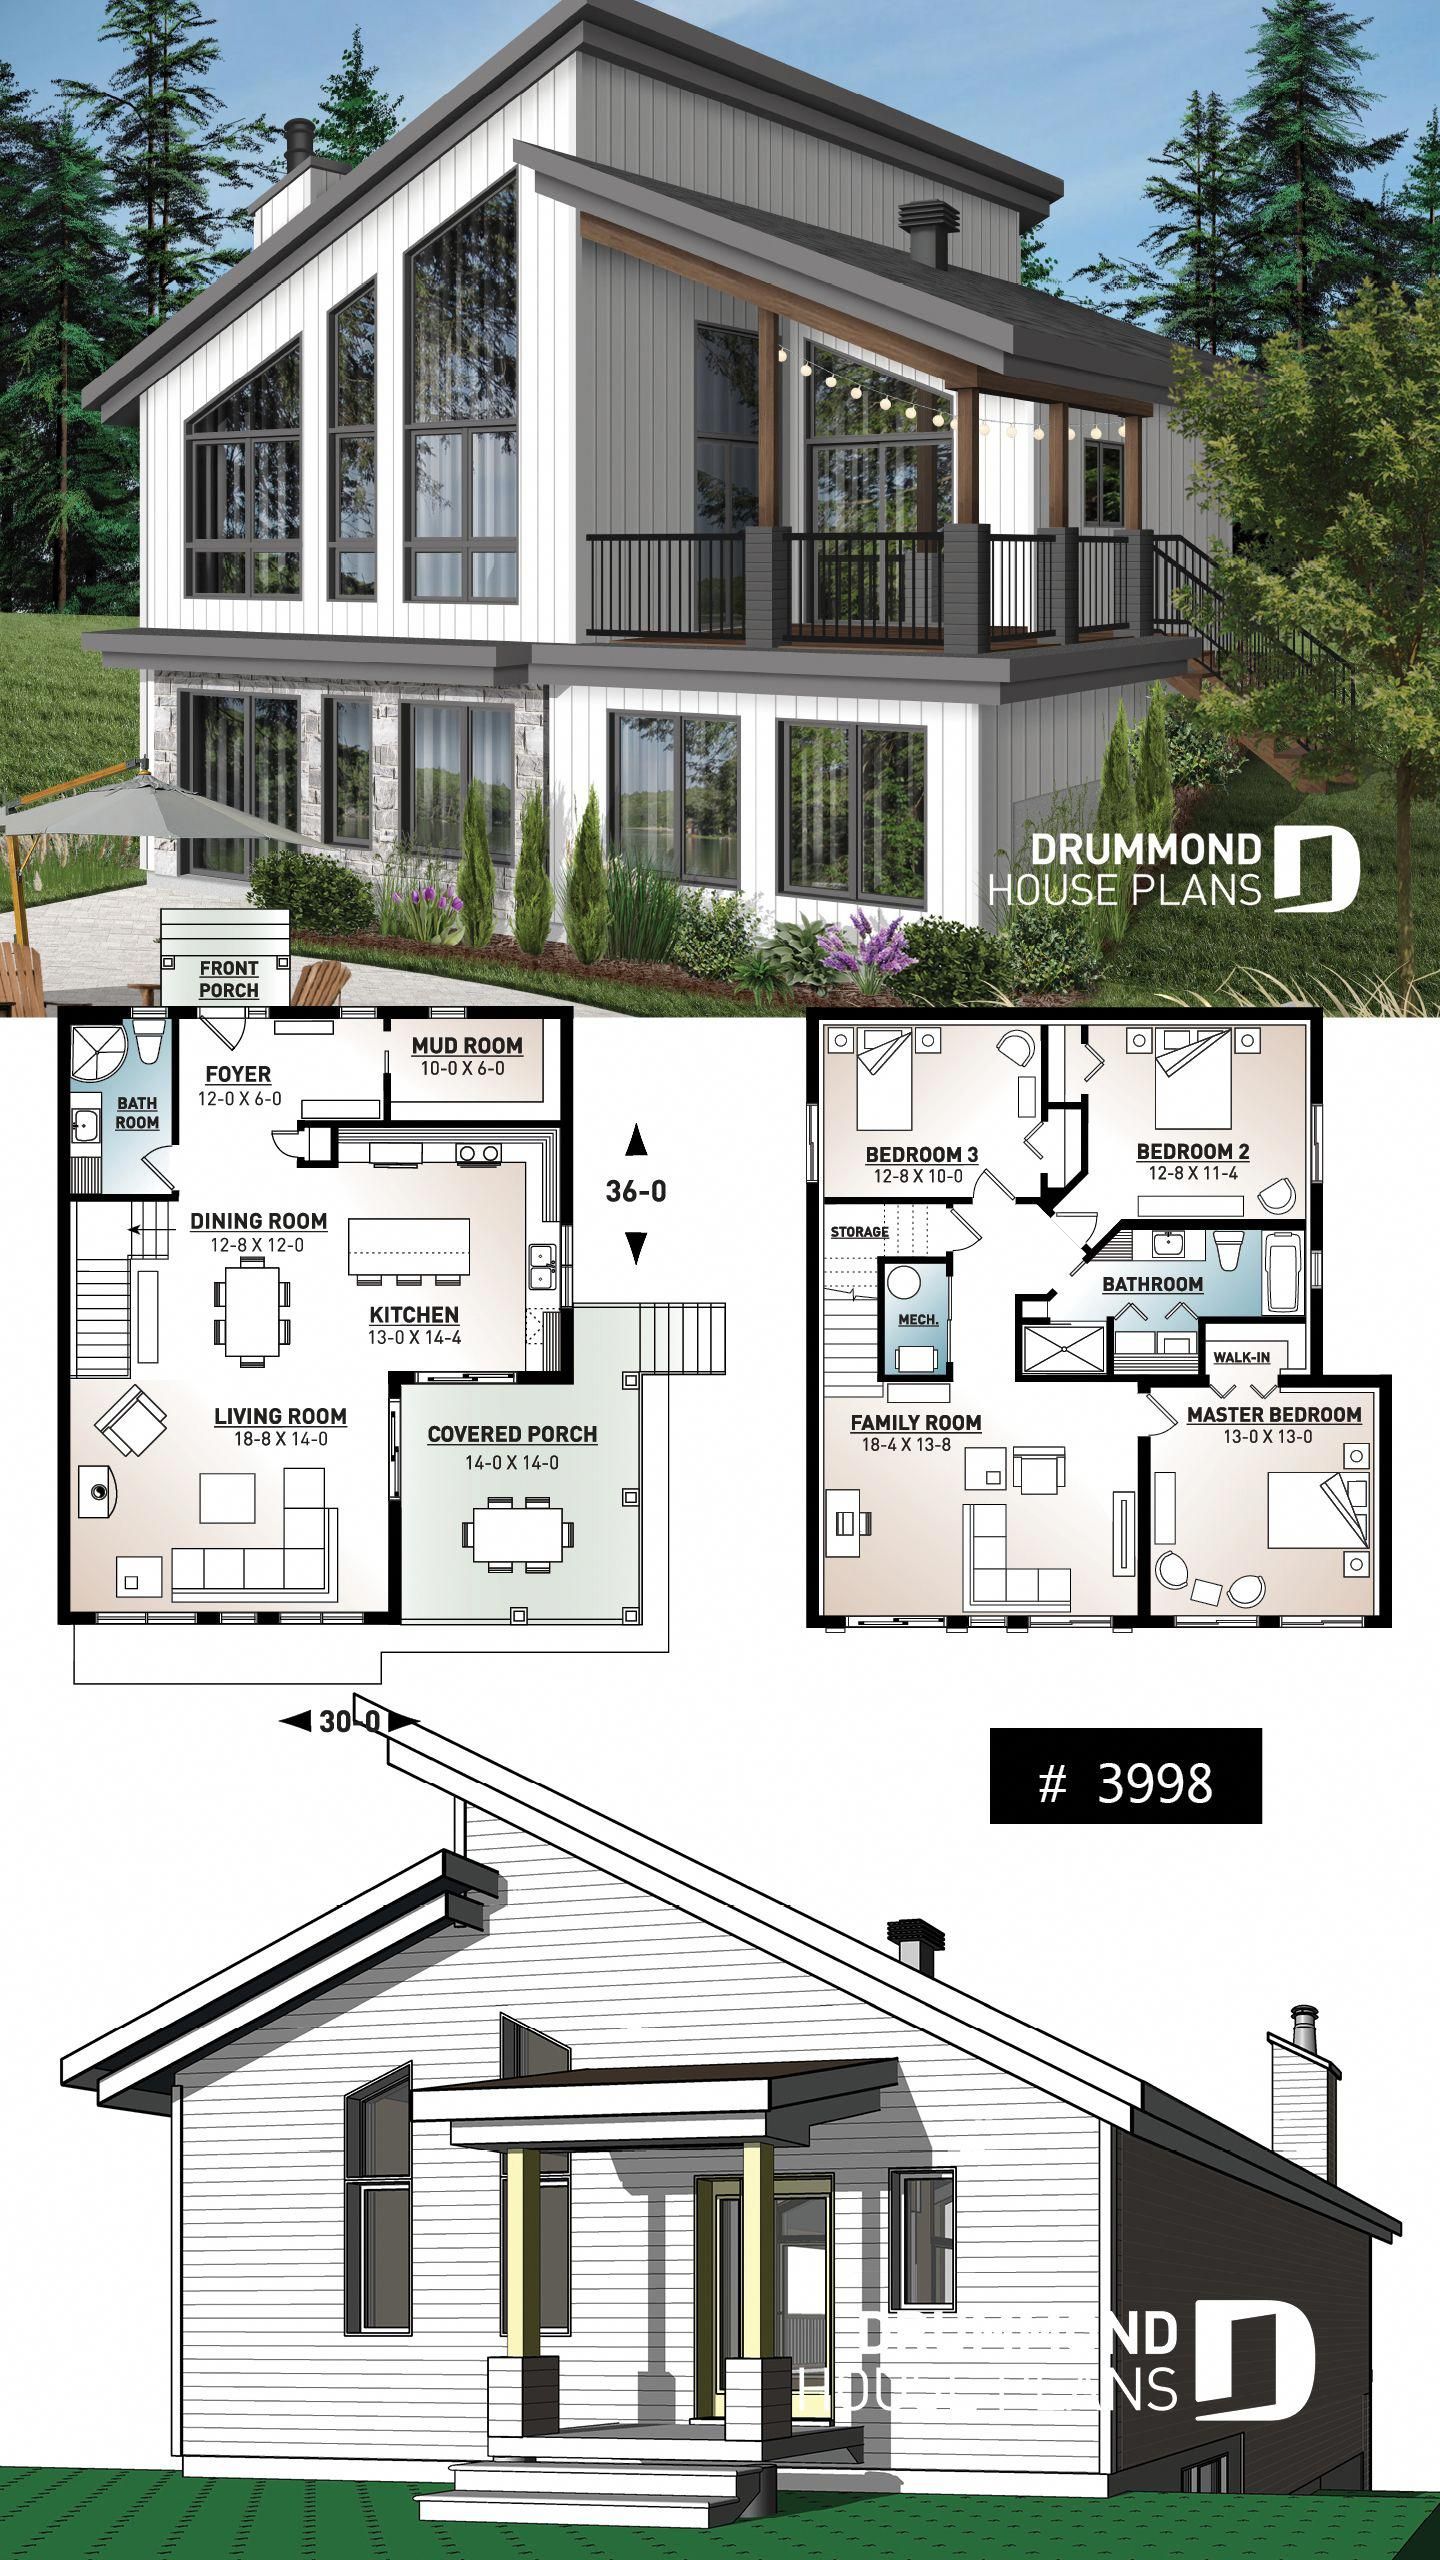 Ski or mountain cottage plan with walkout basement, large